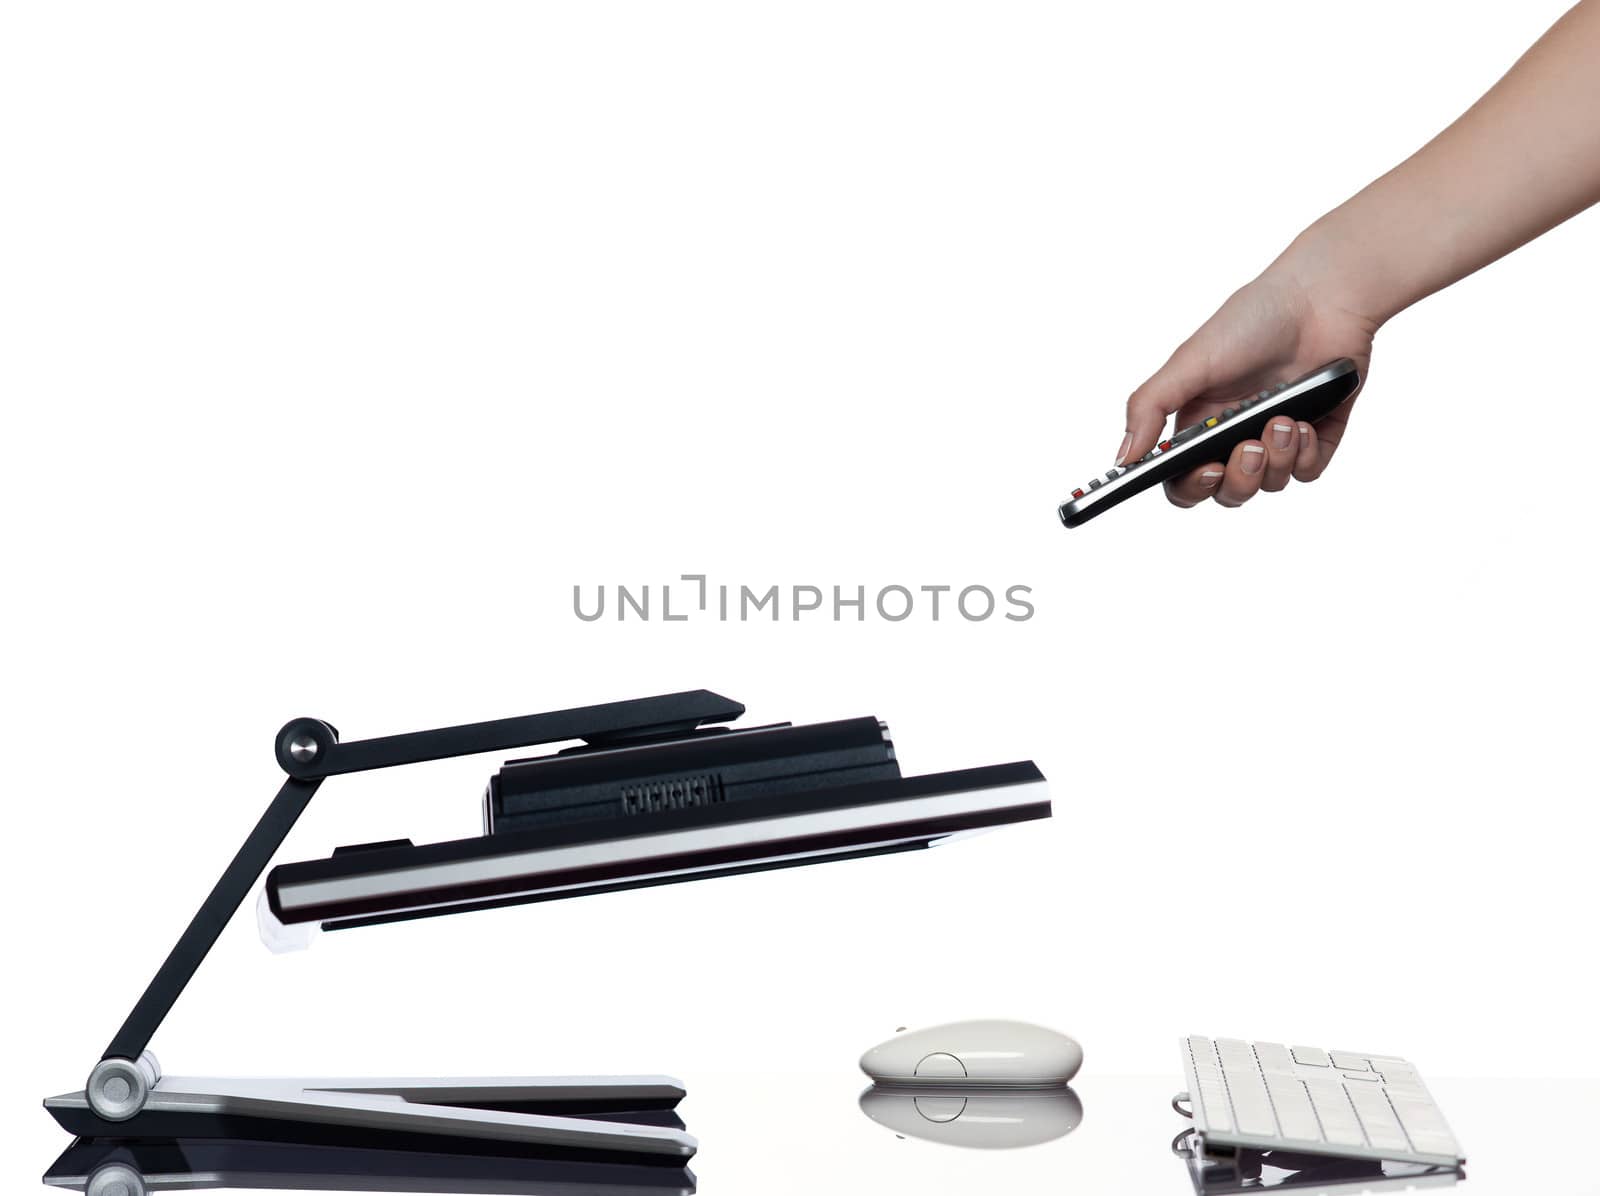 human hand holding remote control and a computer display monitor on isolated white background expressing failure concept